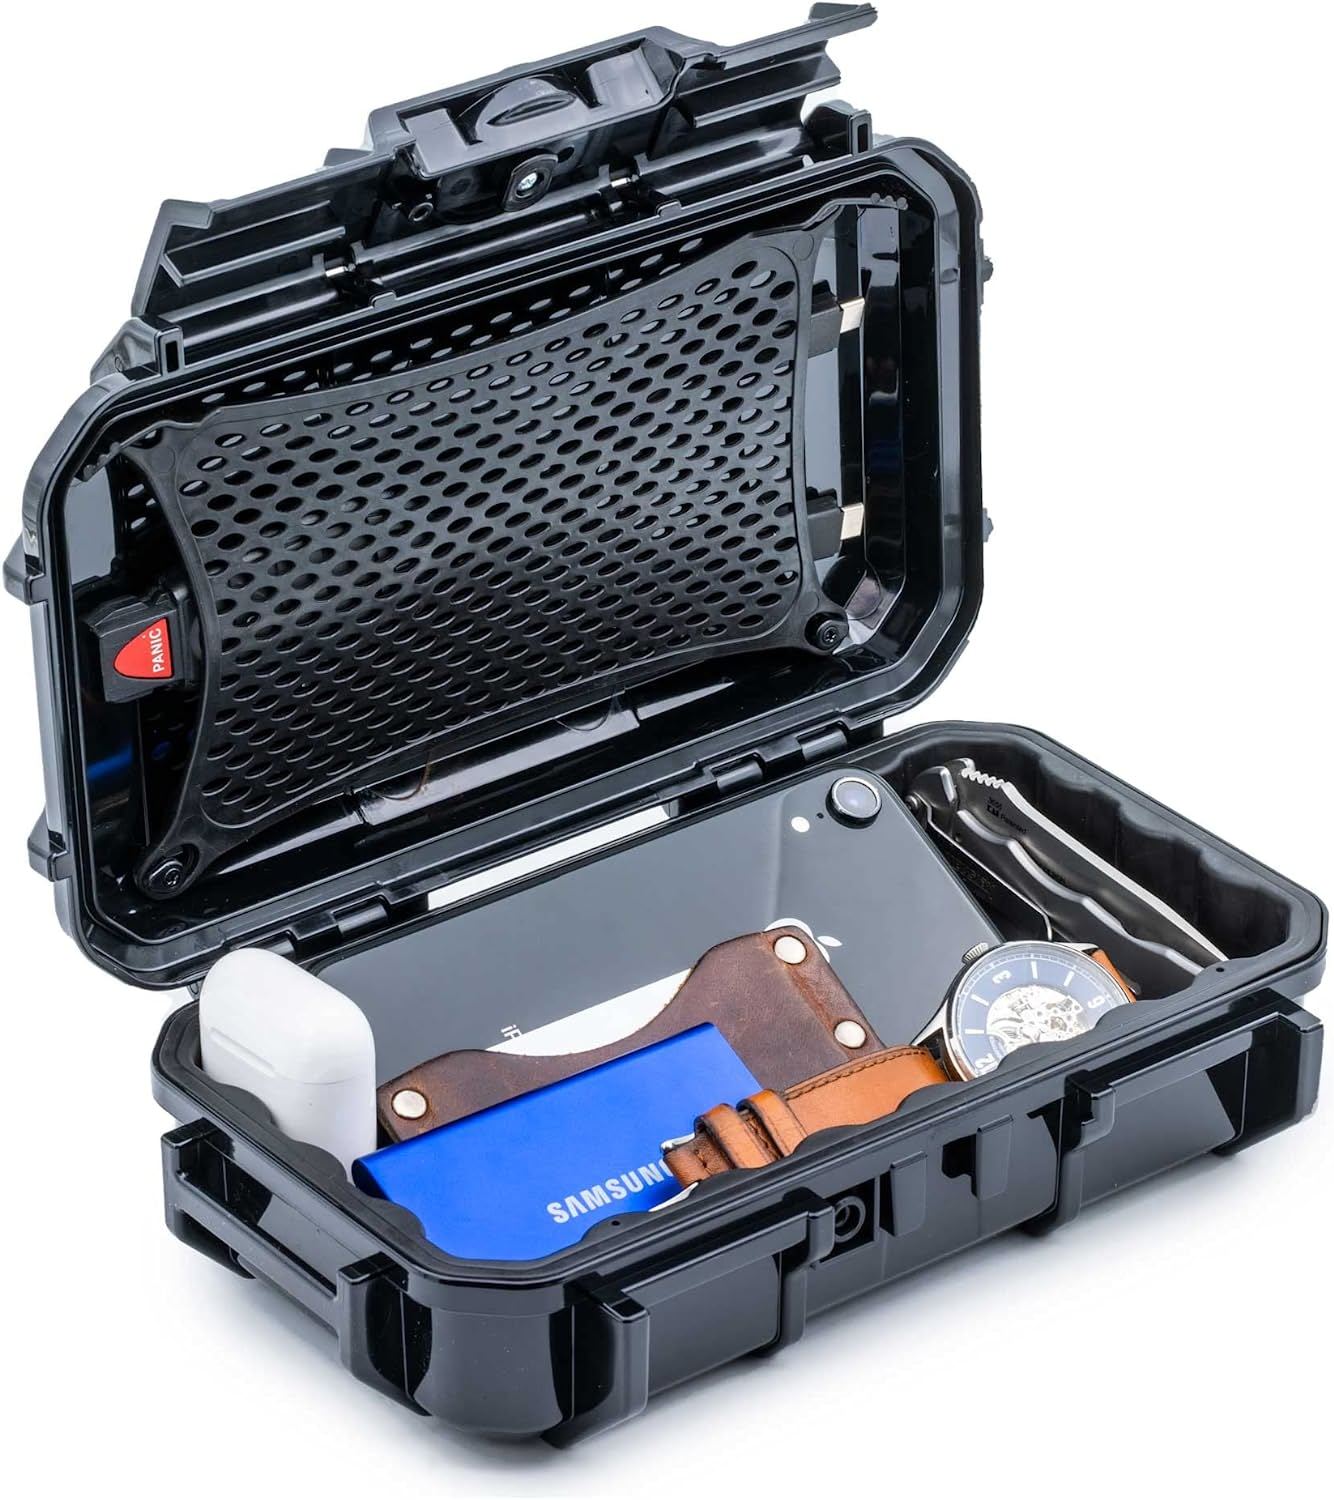 Primary image for Evergreen 56 Waterproof Dry Box Protective Case - Travel Safe/Mil, Knives